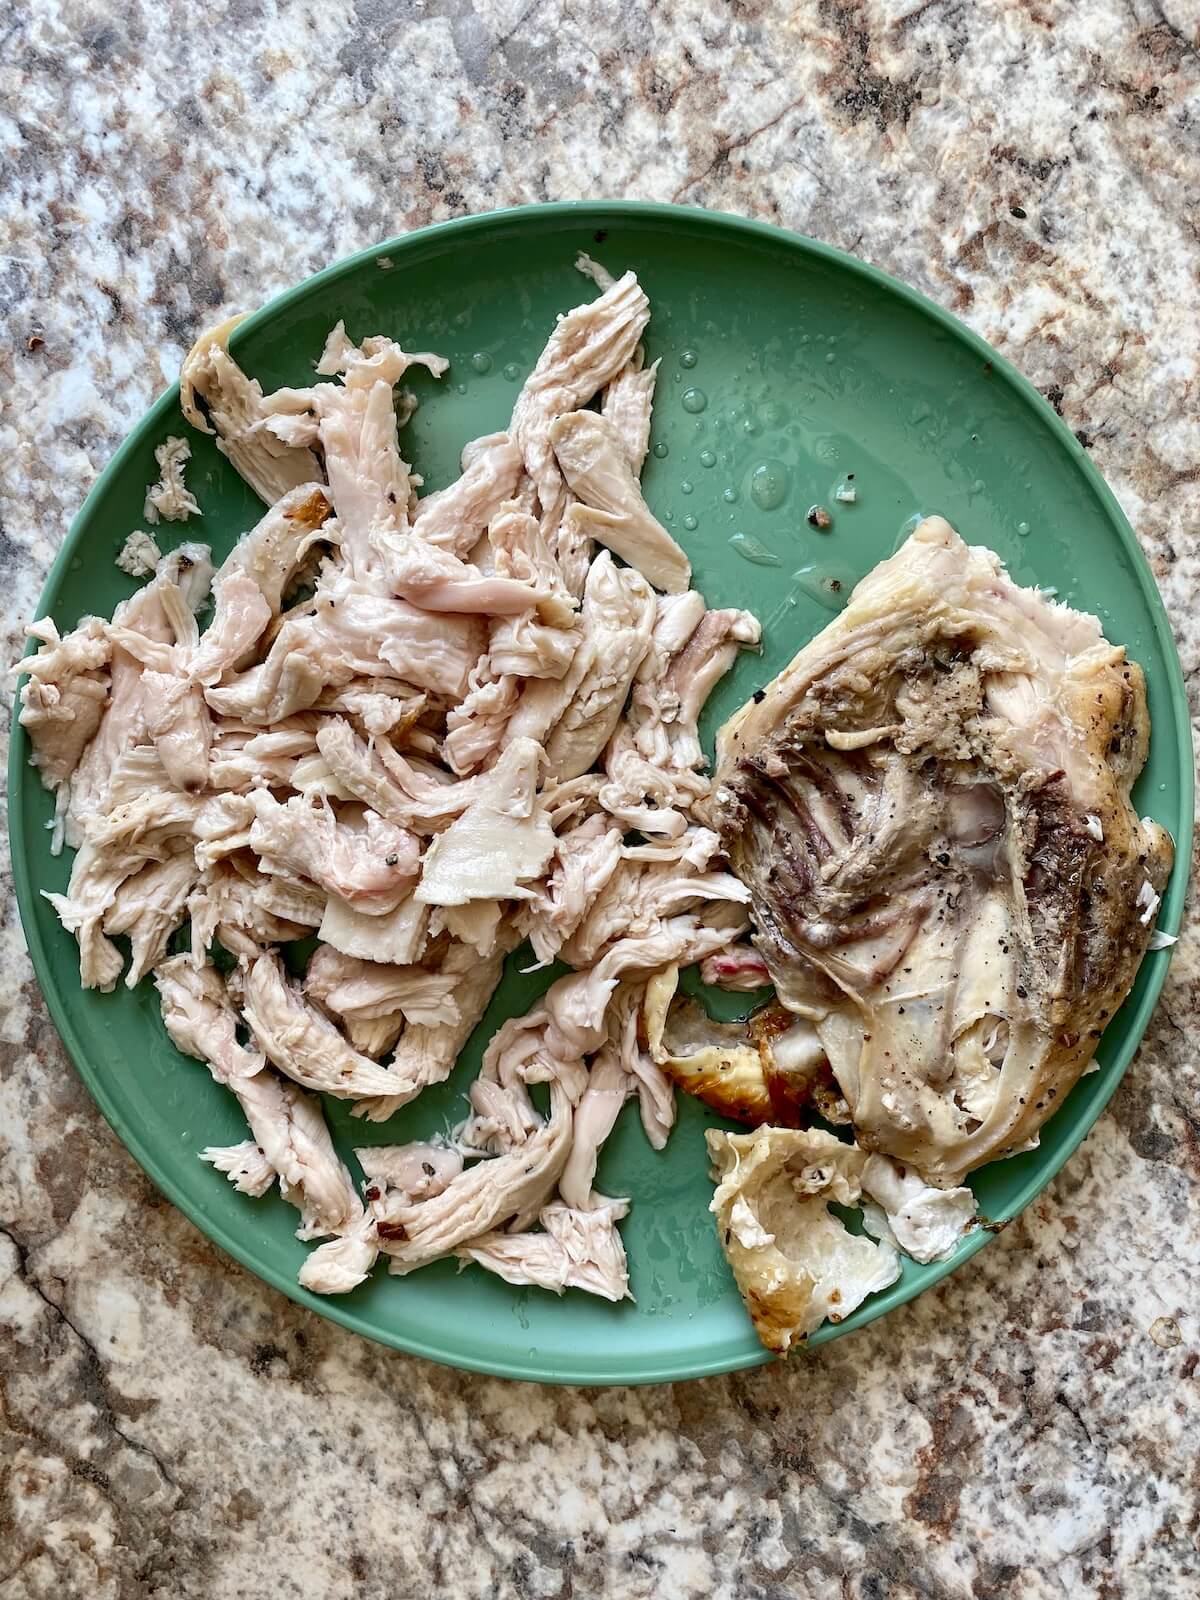 A green plate with shredded chicken breast on it.